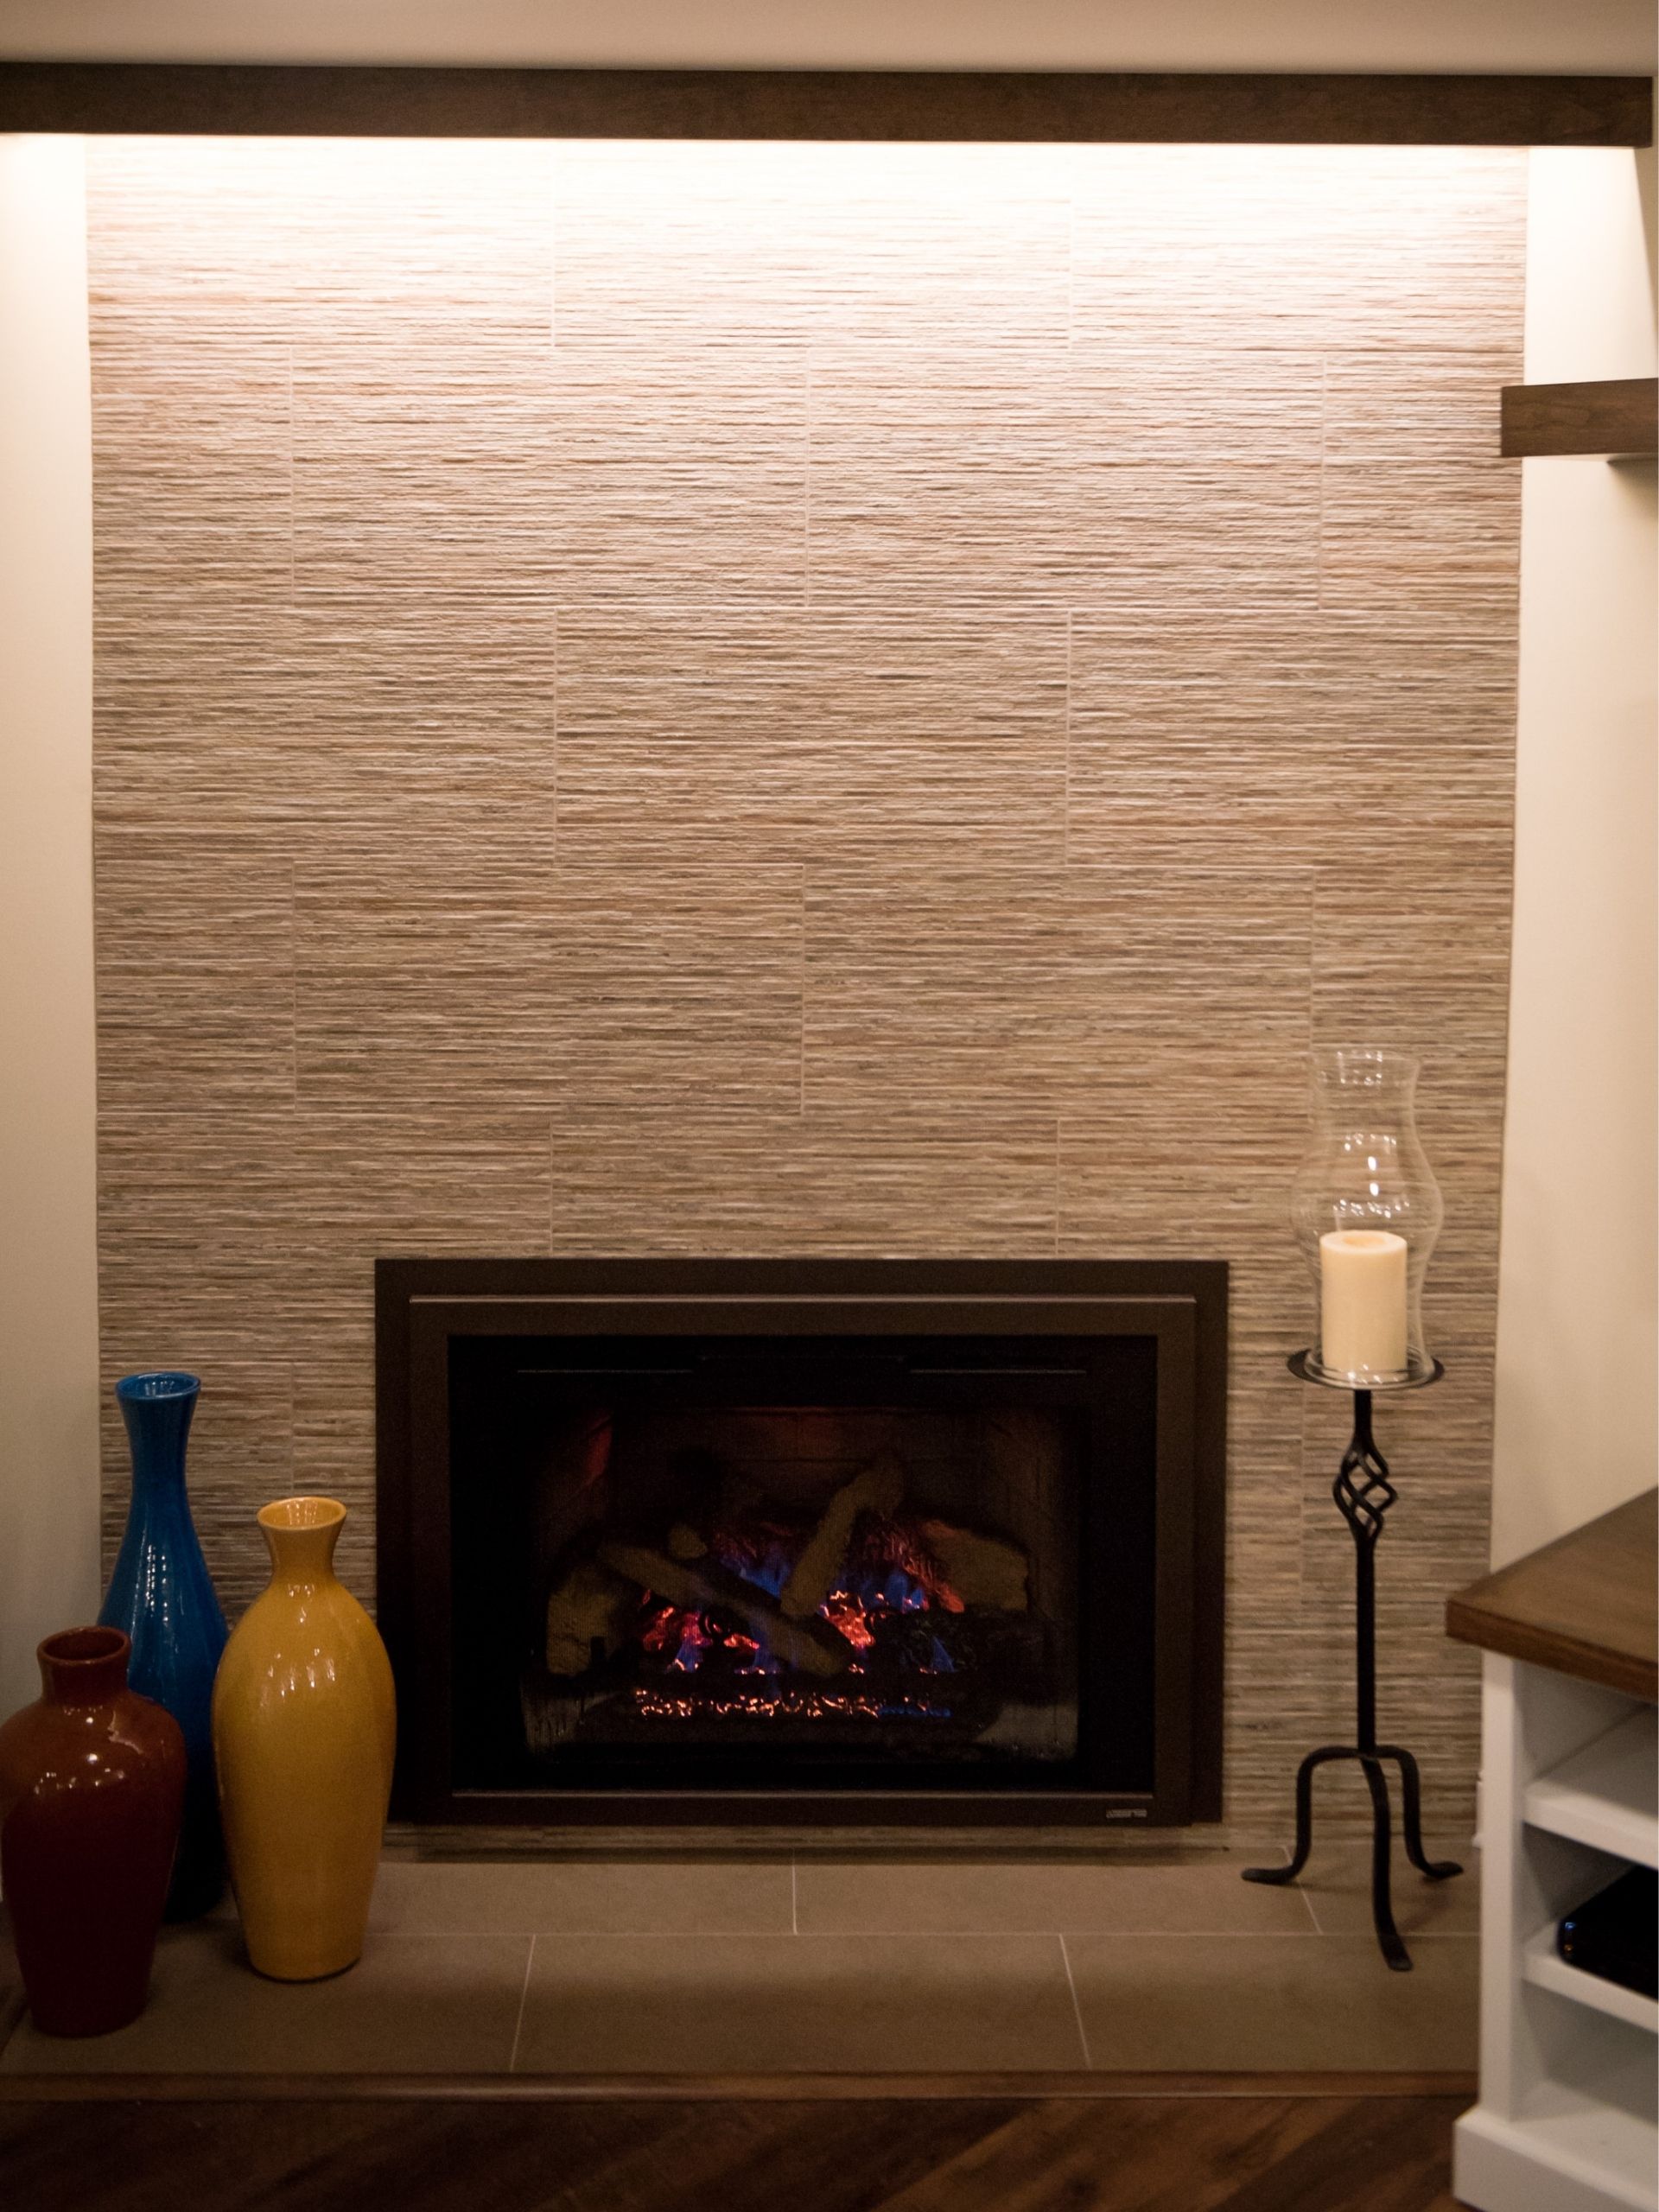 basement remodeling ideas: Basement fireplace, fire lit, candle and vases